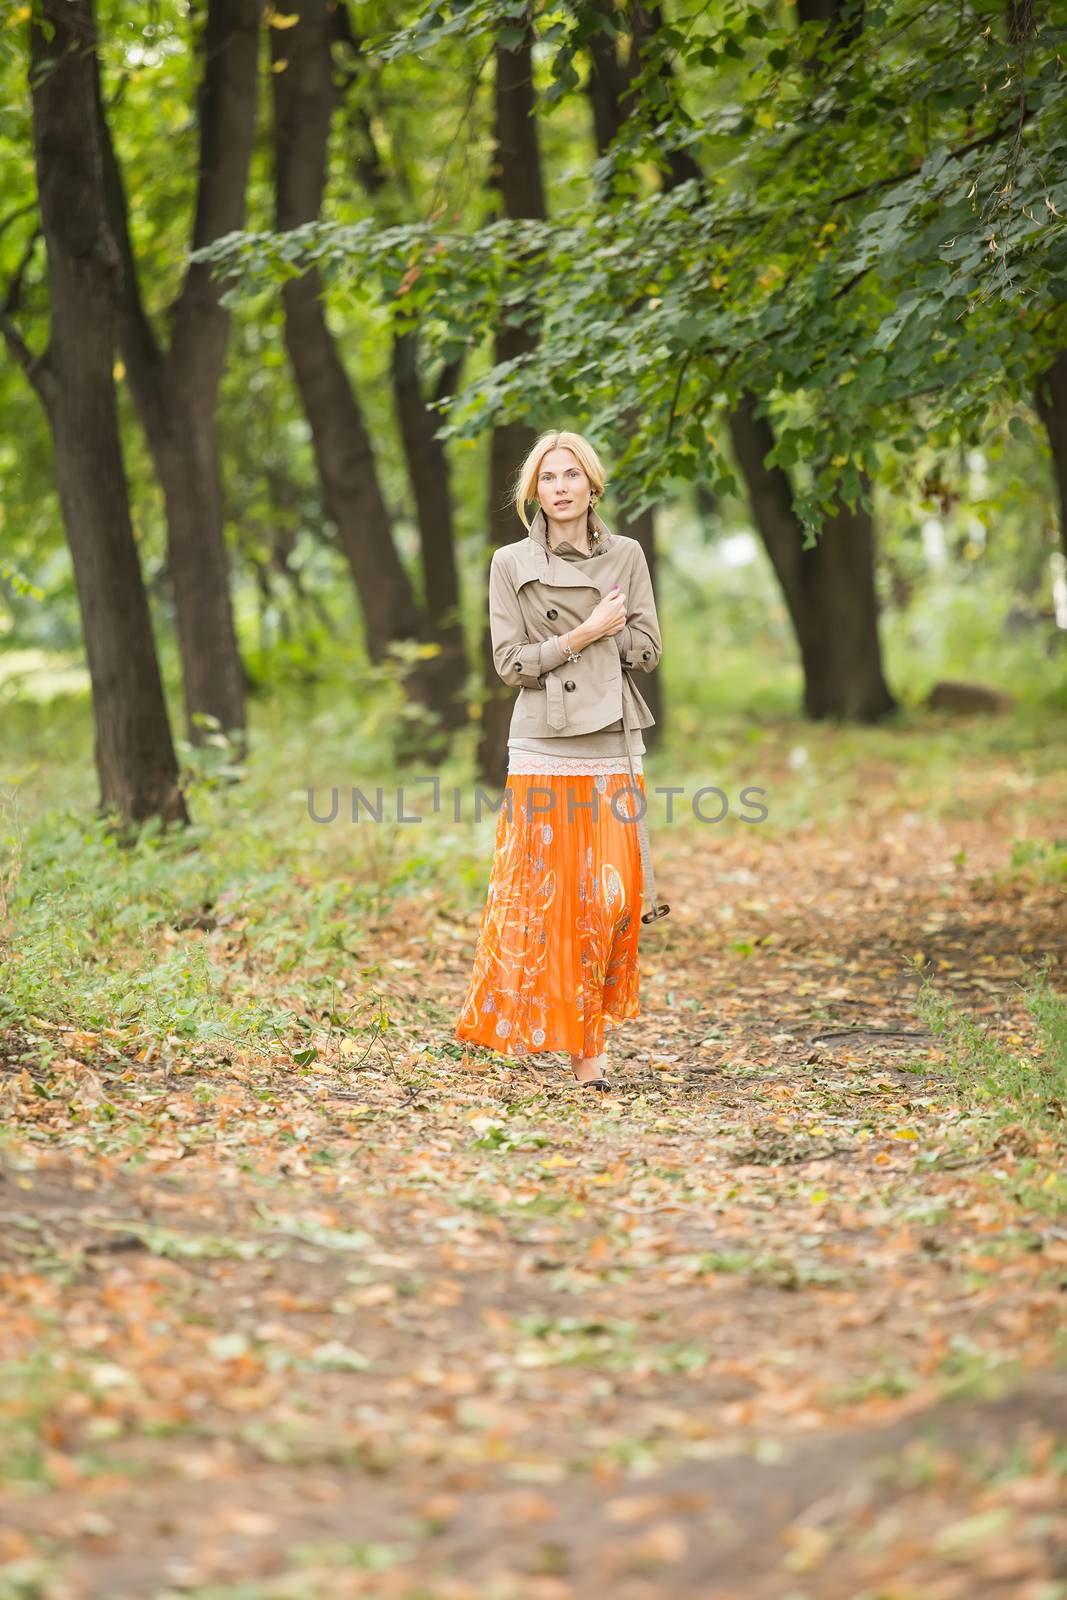 Young fashionable woman walking in spring park